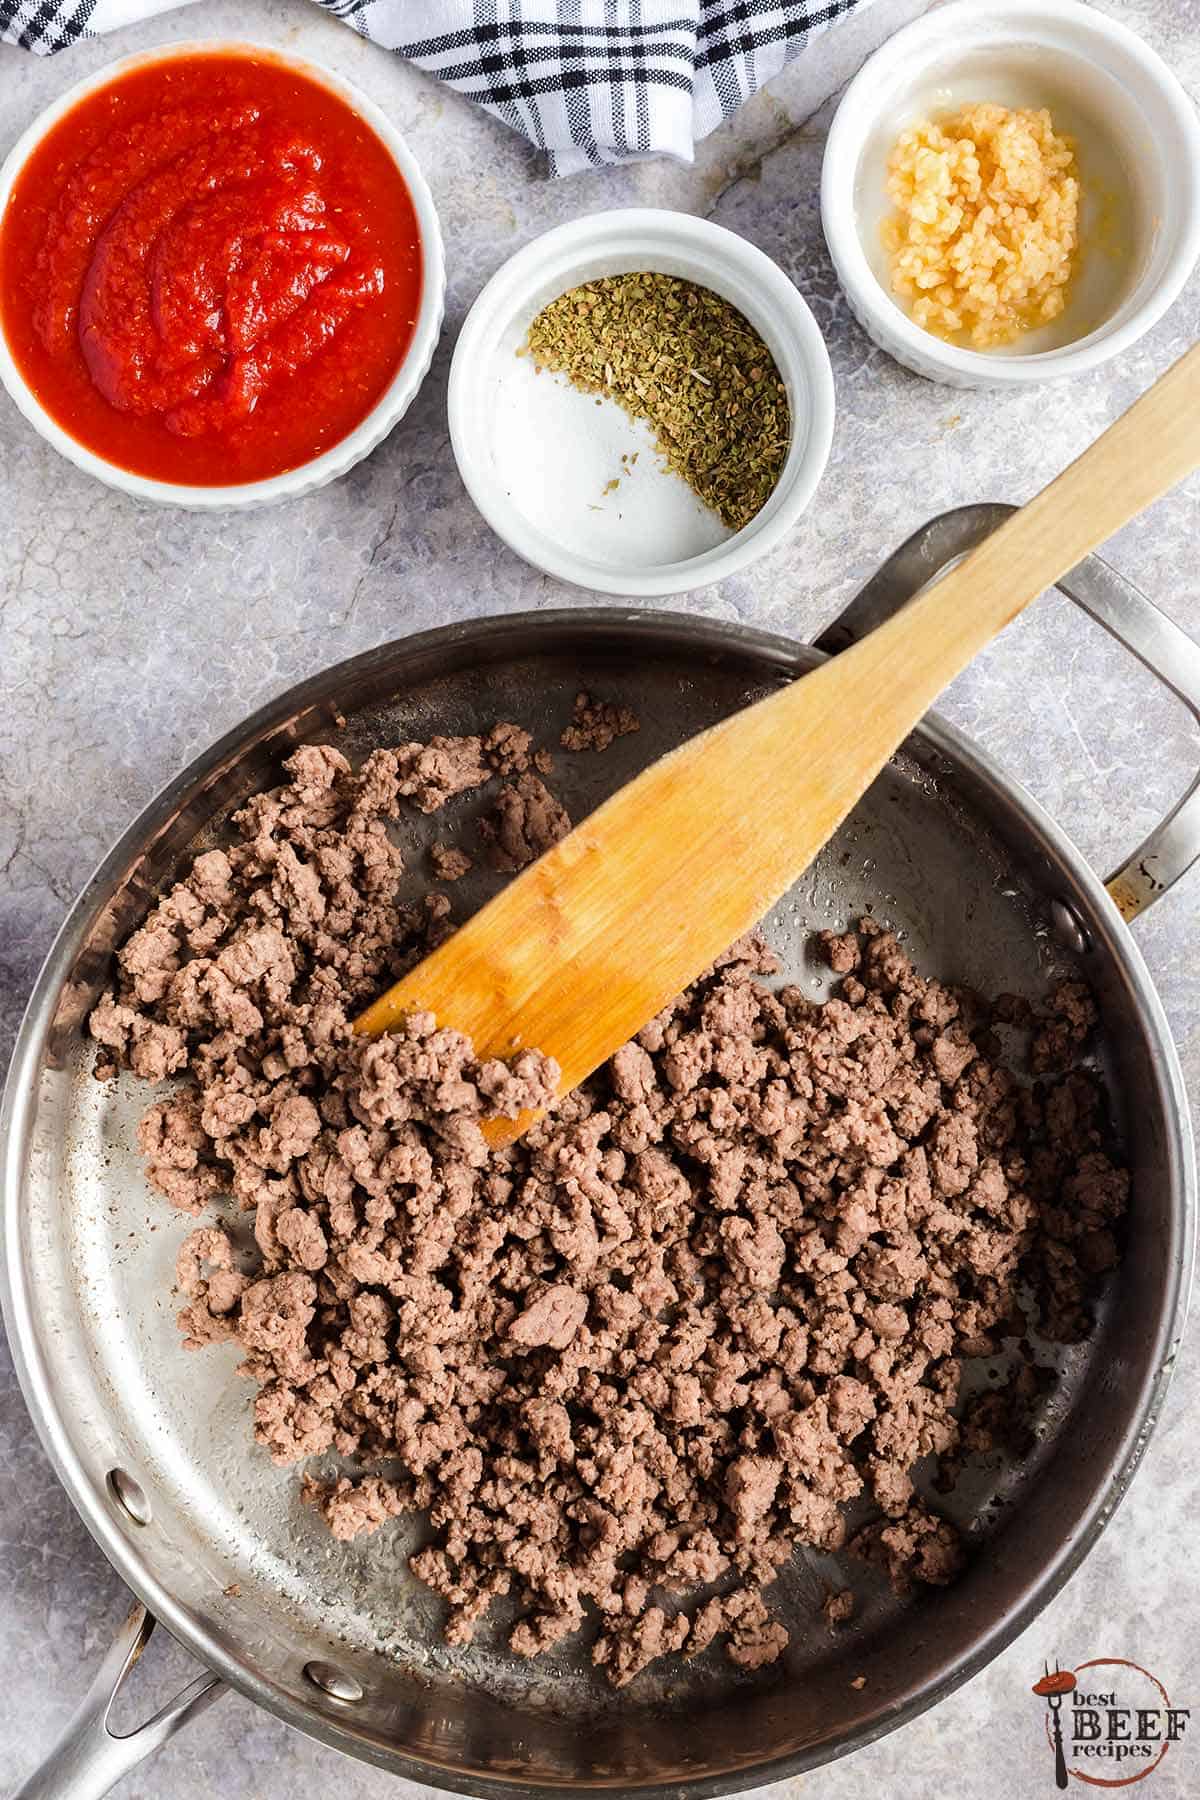 a frying pan with browned ground beef next to separate bowls of tomato sauce, oregano and garlic